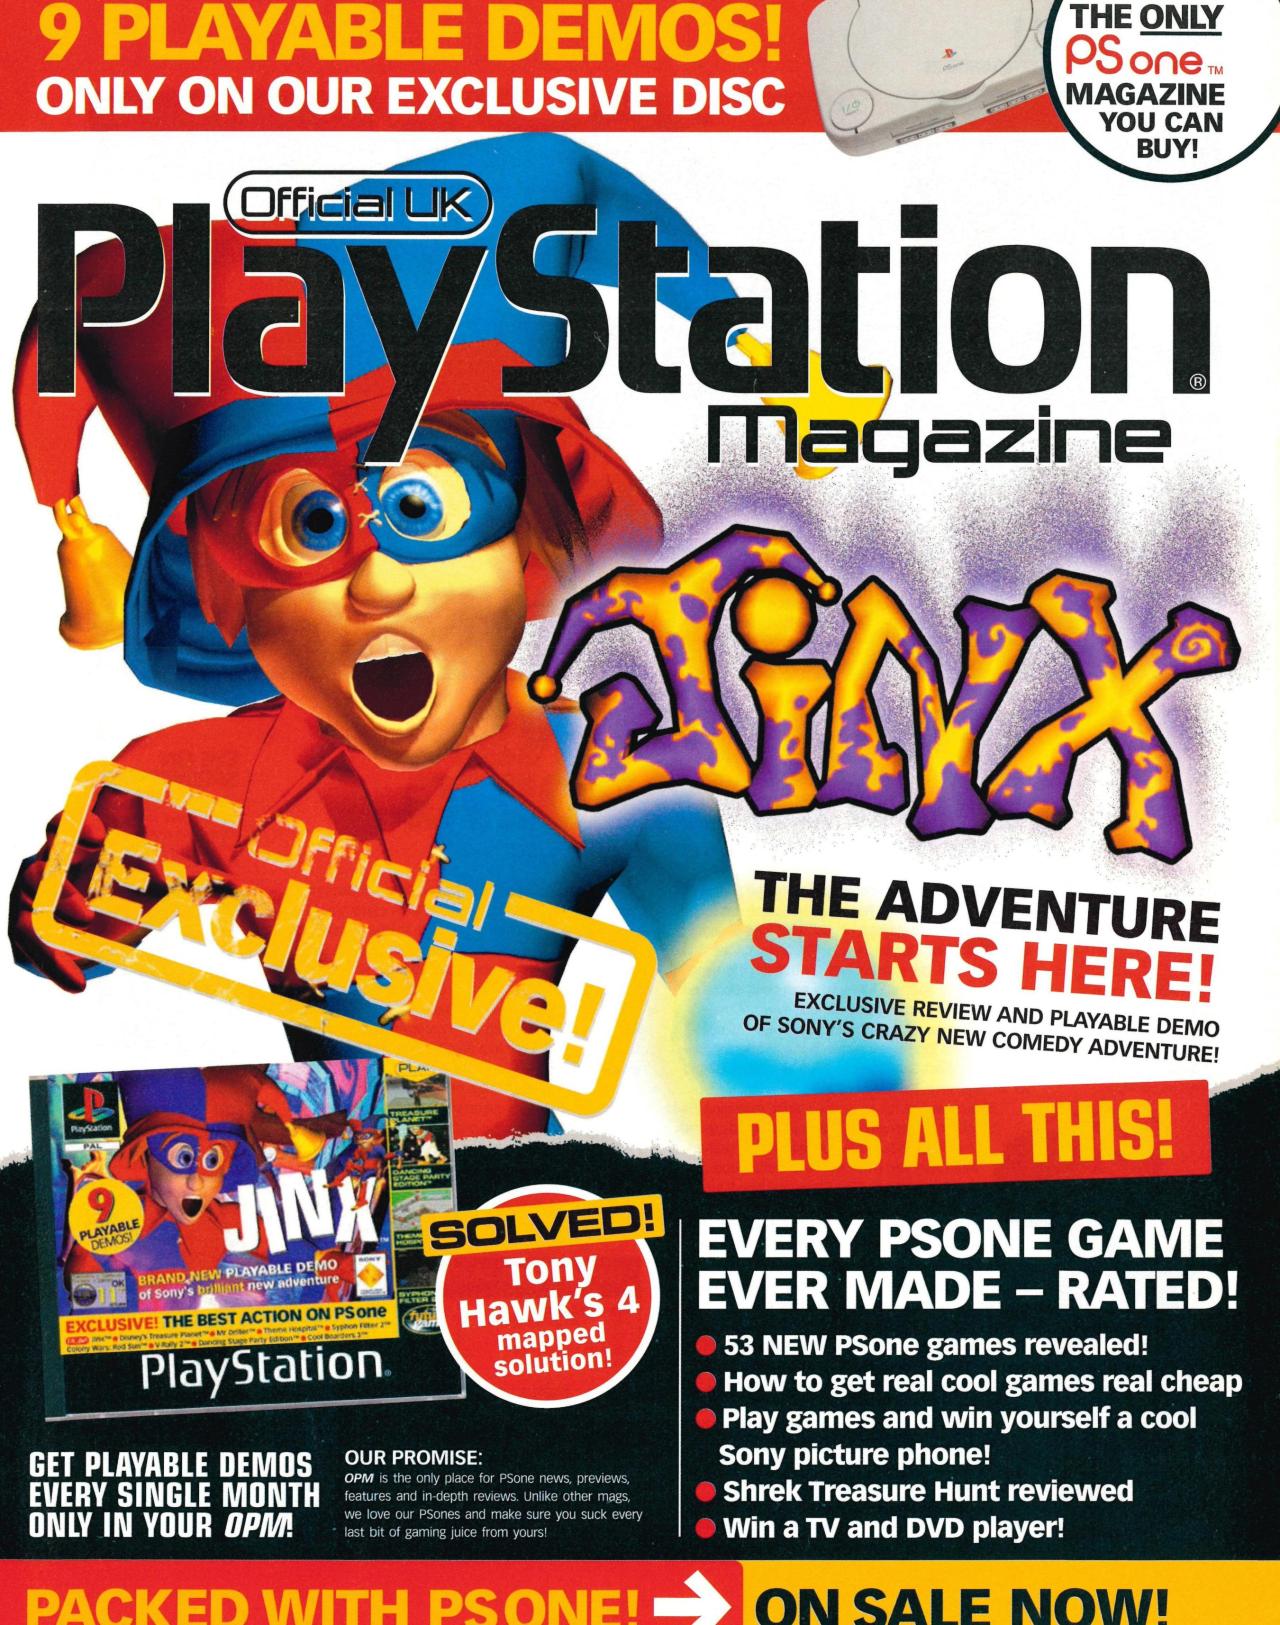 ‘Official PlayStation Magazine (UK) - ‘Jinx Demo Disc’‘[PS1] [UK] [MAGAZINE] [2003]
“ “Jinx is a 3D platformer for the Playstation in the vein of other 3D platformers like Spyro. The main character Jinx, a court jester, is tasked with finding and...